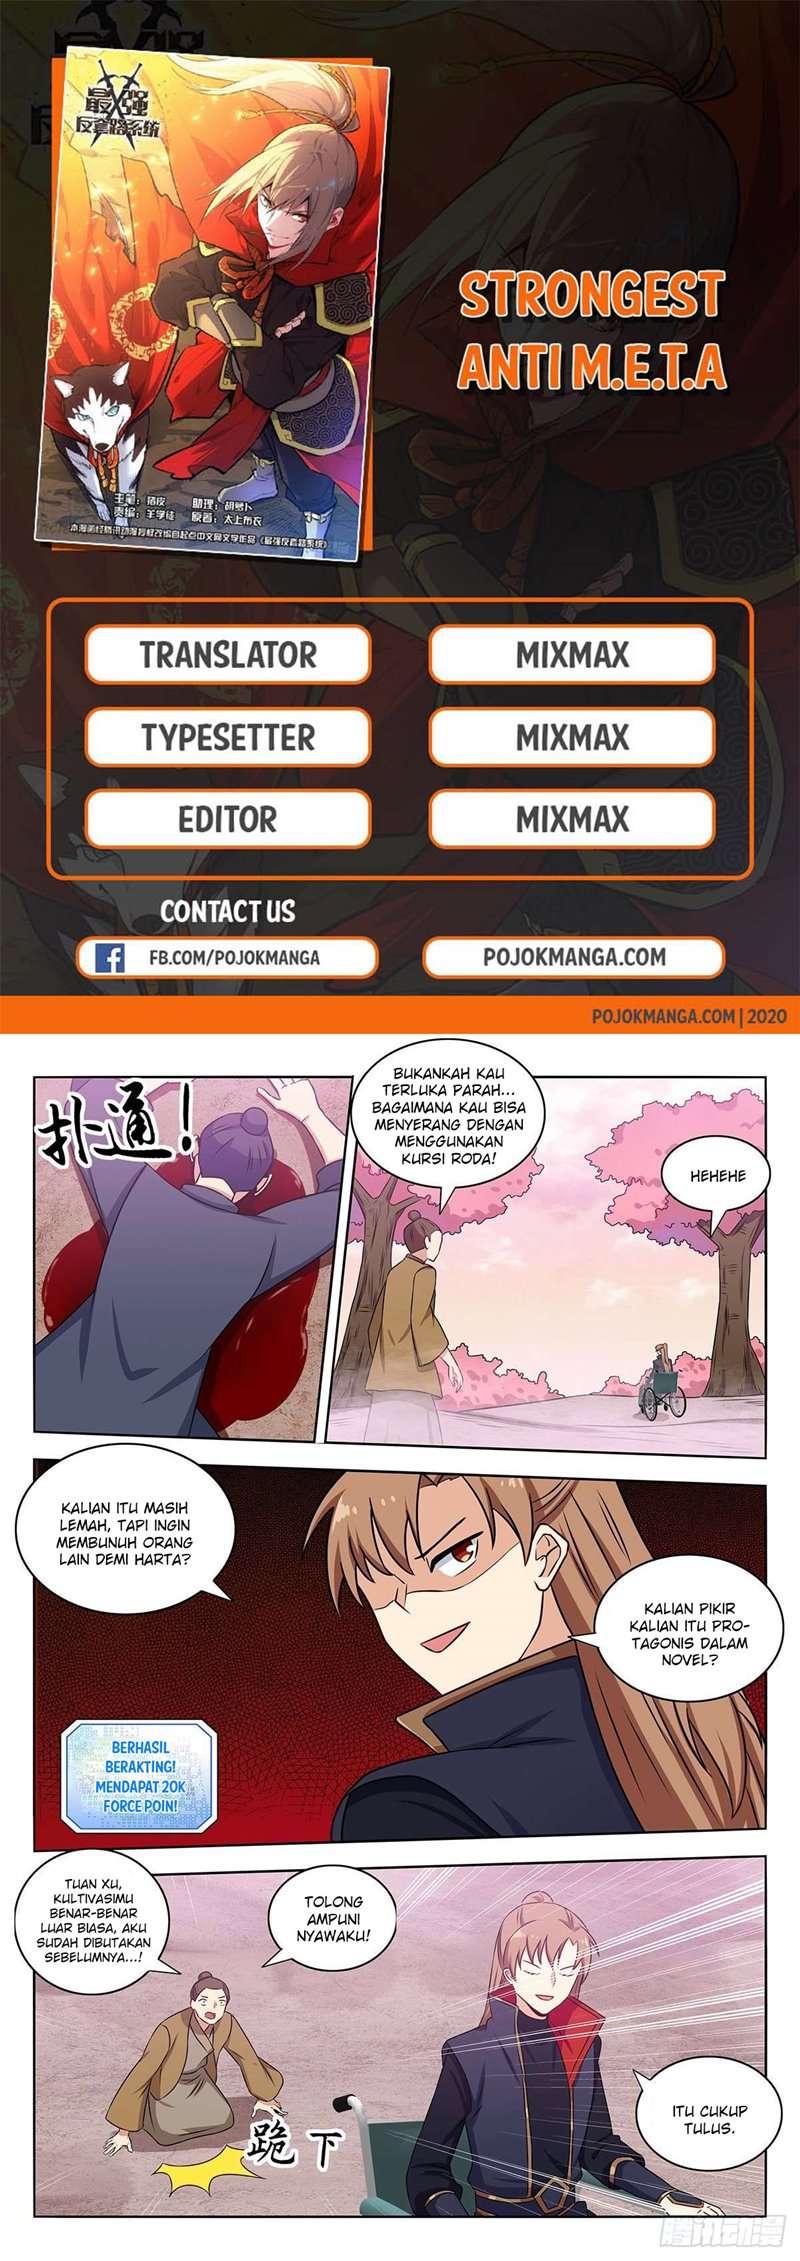 Strongest Anti M.E.T.A. Chapter 374